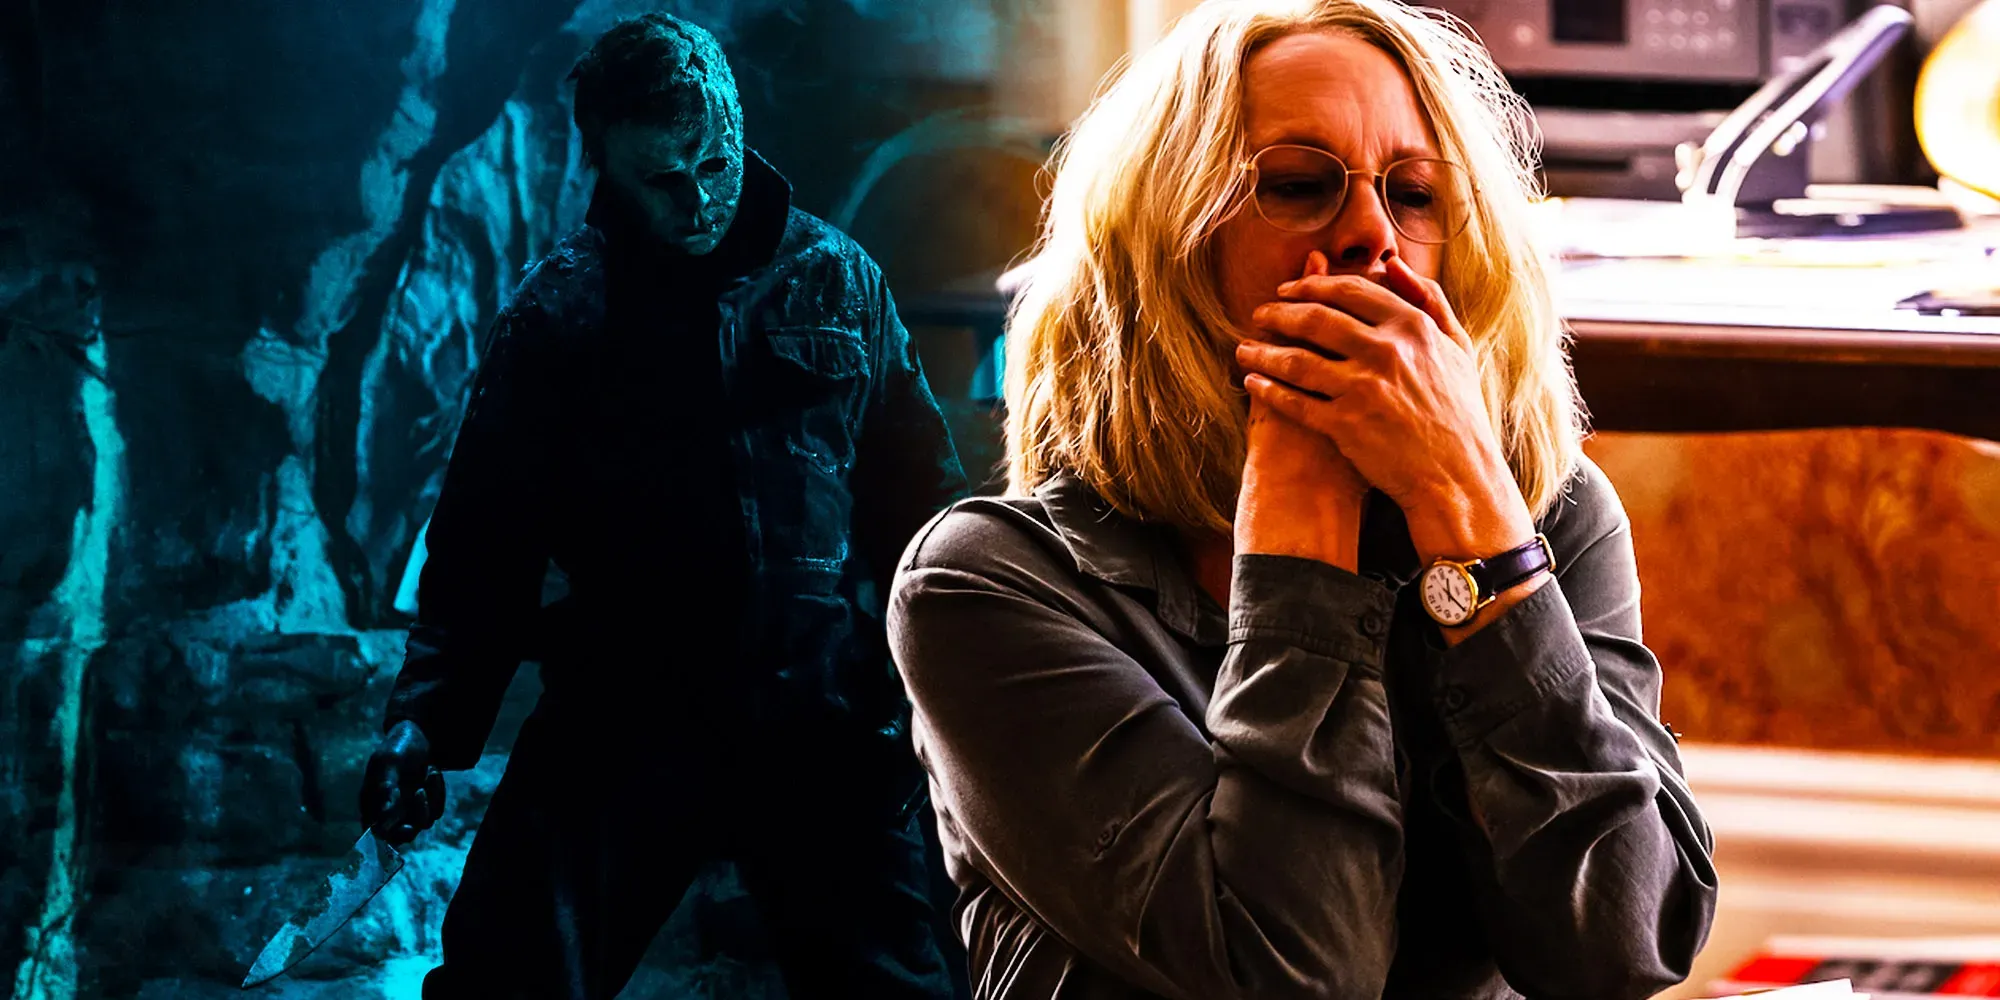 Laurie-strode-halloween-ends-michael-myers-supernatural